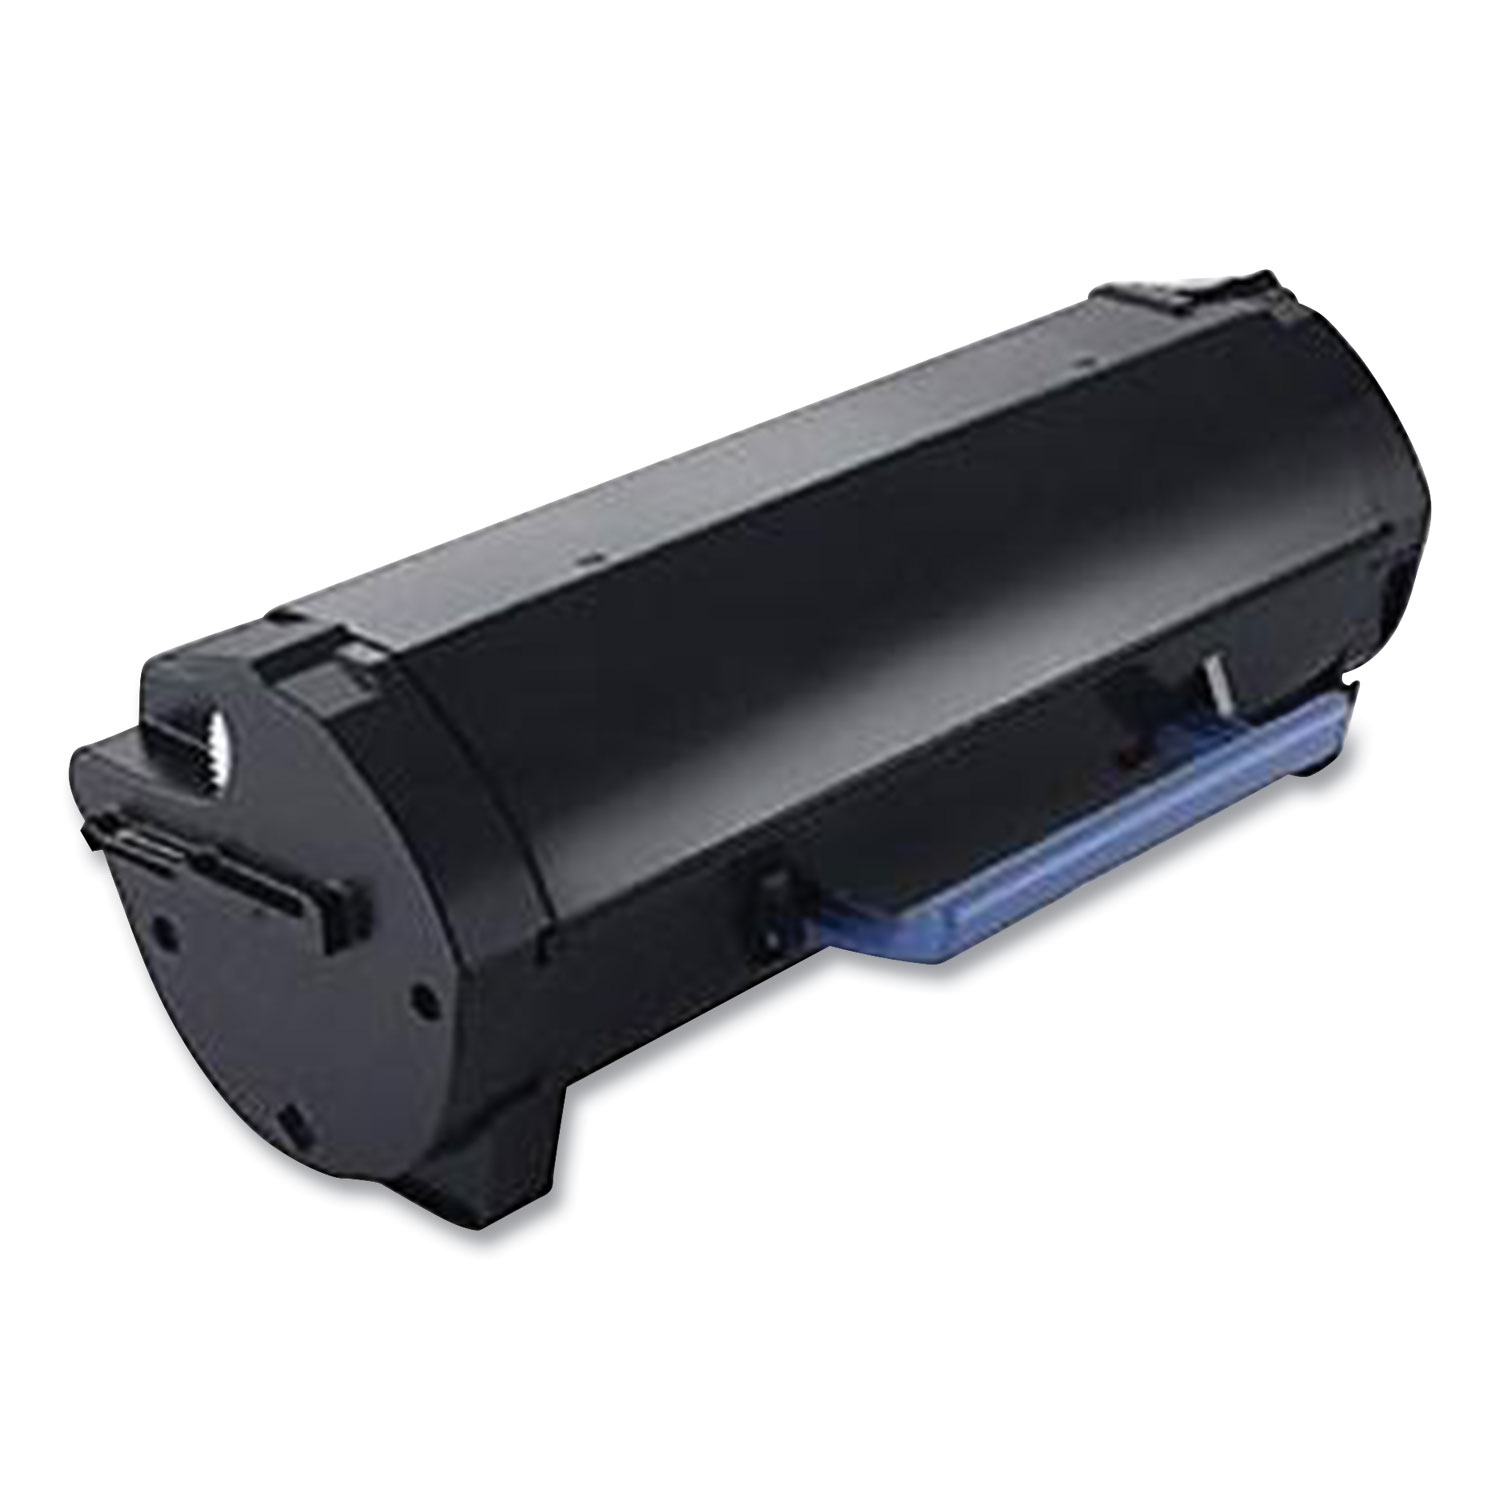  Dell GGCTW GGCTW High-Yield Toner, 8,500 Page-Yield, Black (DLL2601406) 